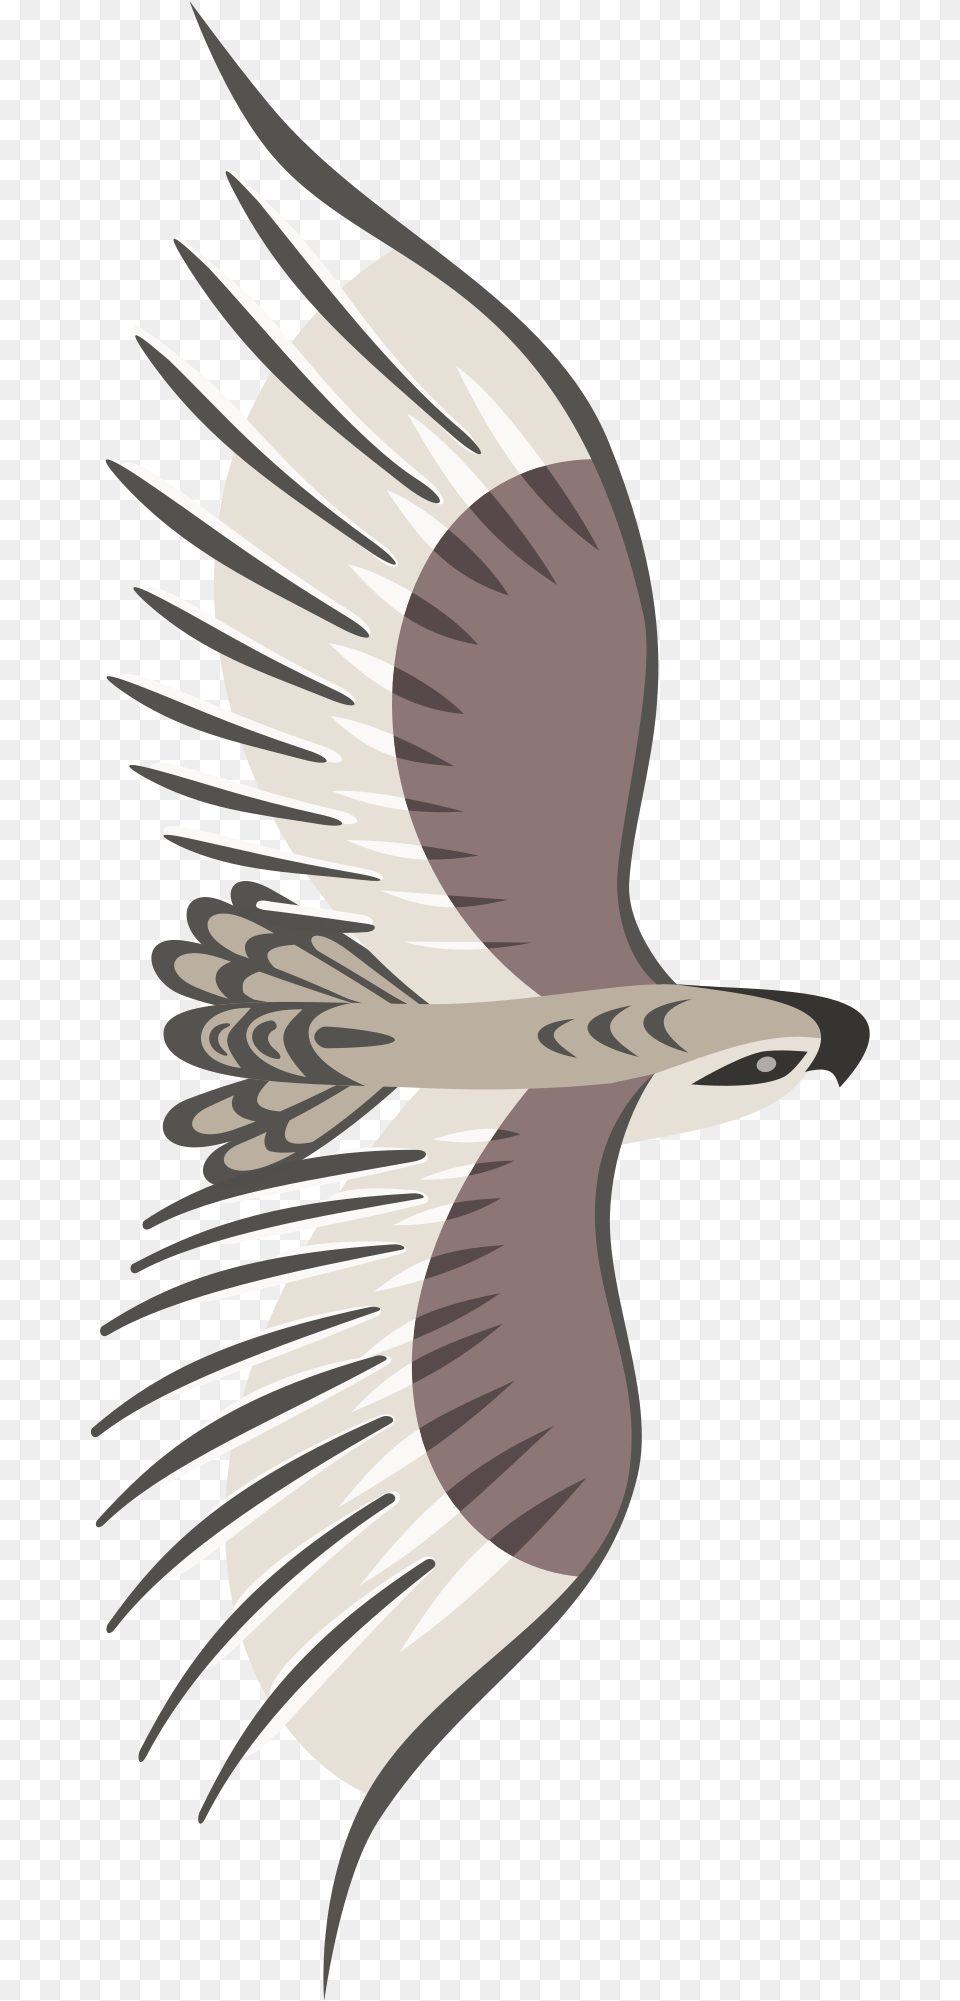 Golden Eagle Clip Arts For Web Clip Arts Flying Bird Top View, Animal, Kite Bird, Vulture, Hawk Png Image